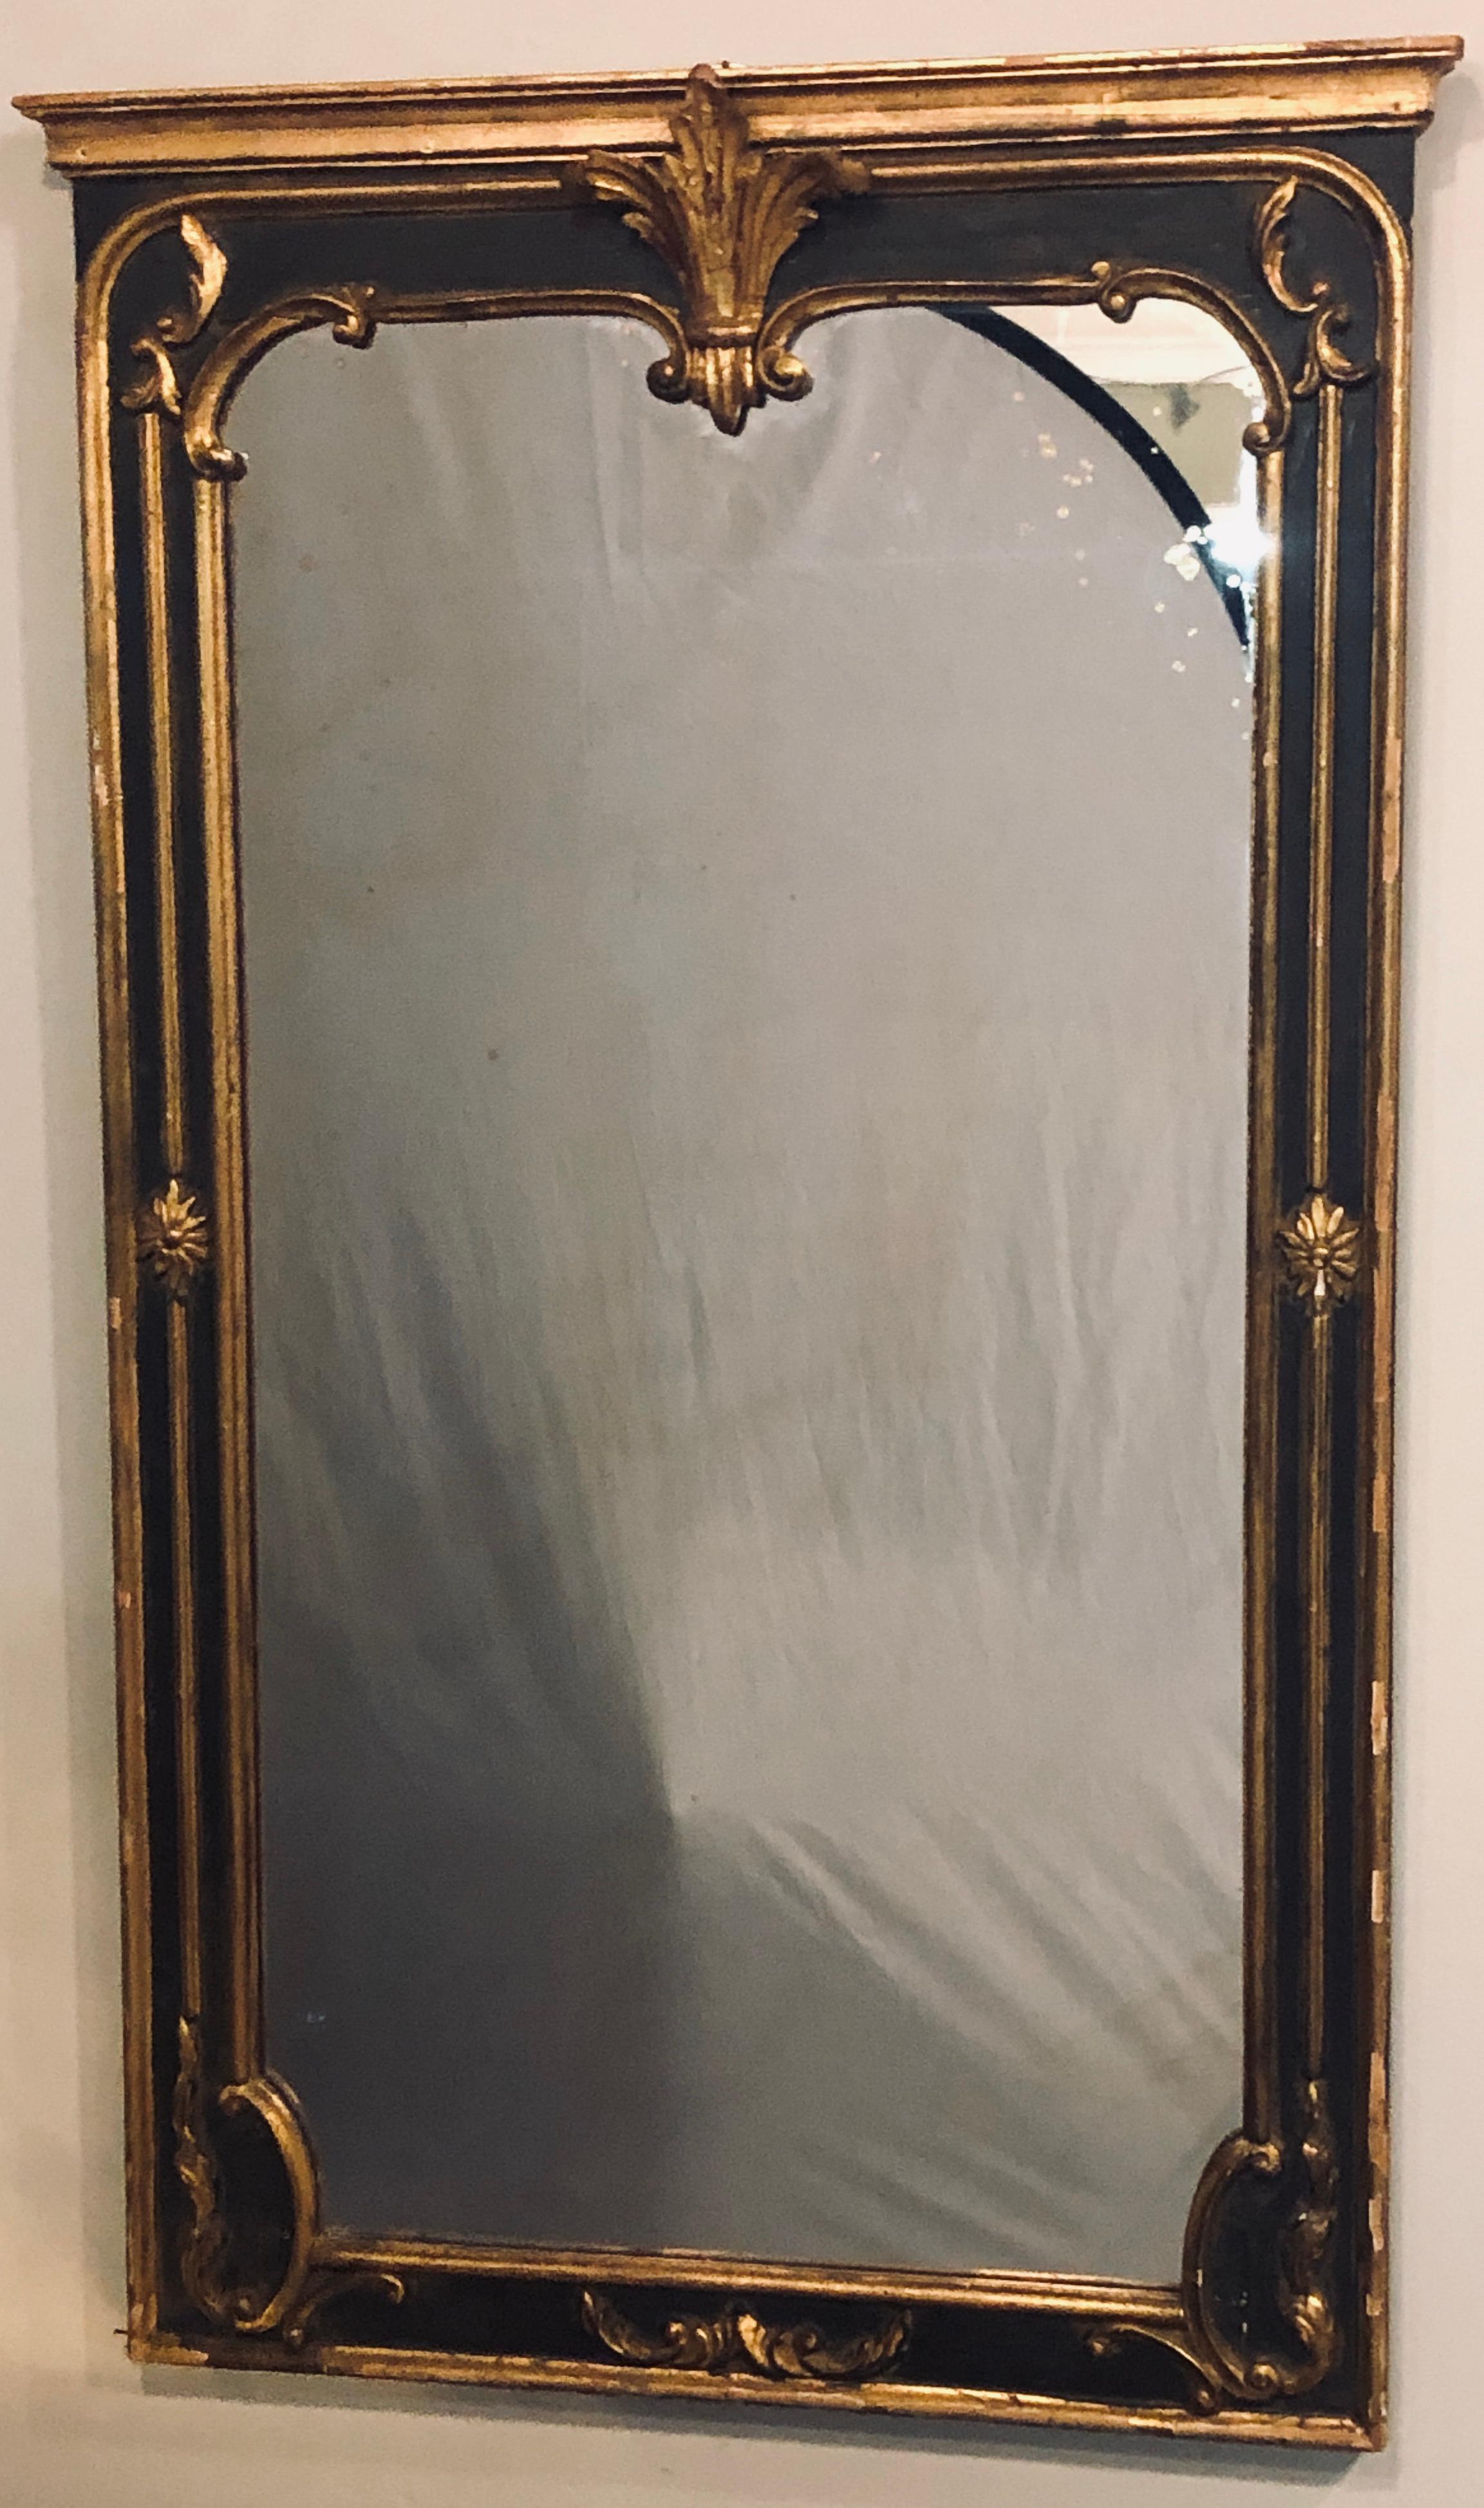 Hollywood Regency Pair of Neoclassical Ebony and Gilt Decorated / Wall / Pier or Console Mirrors